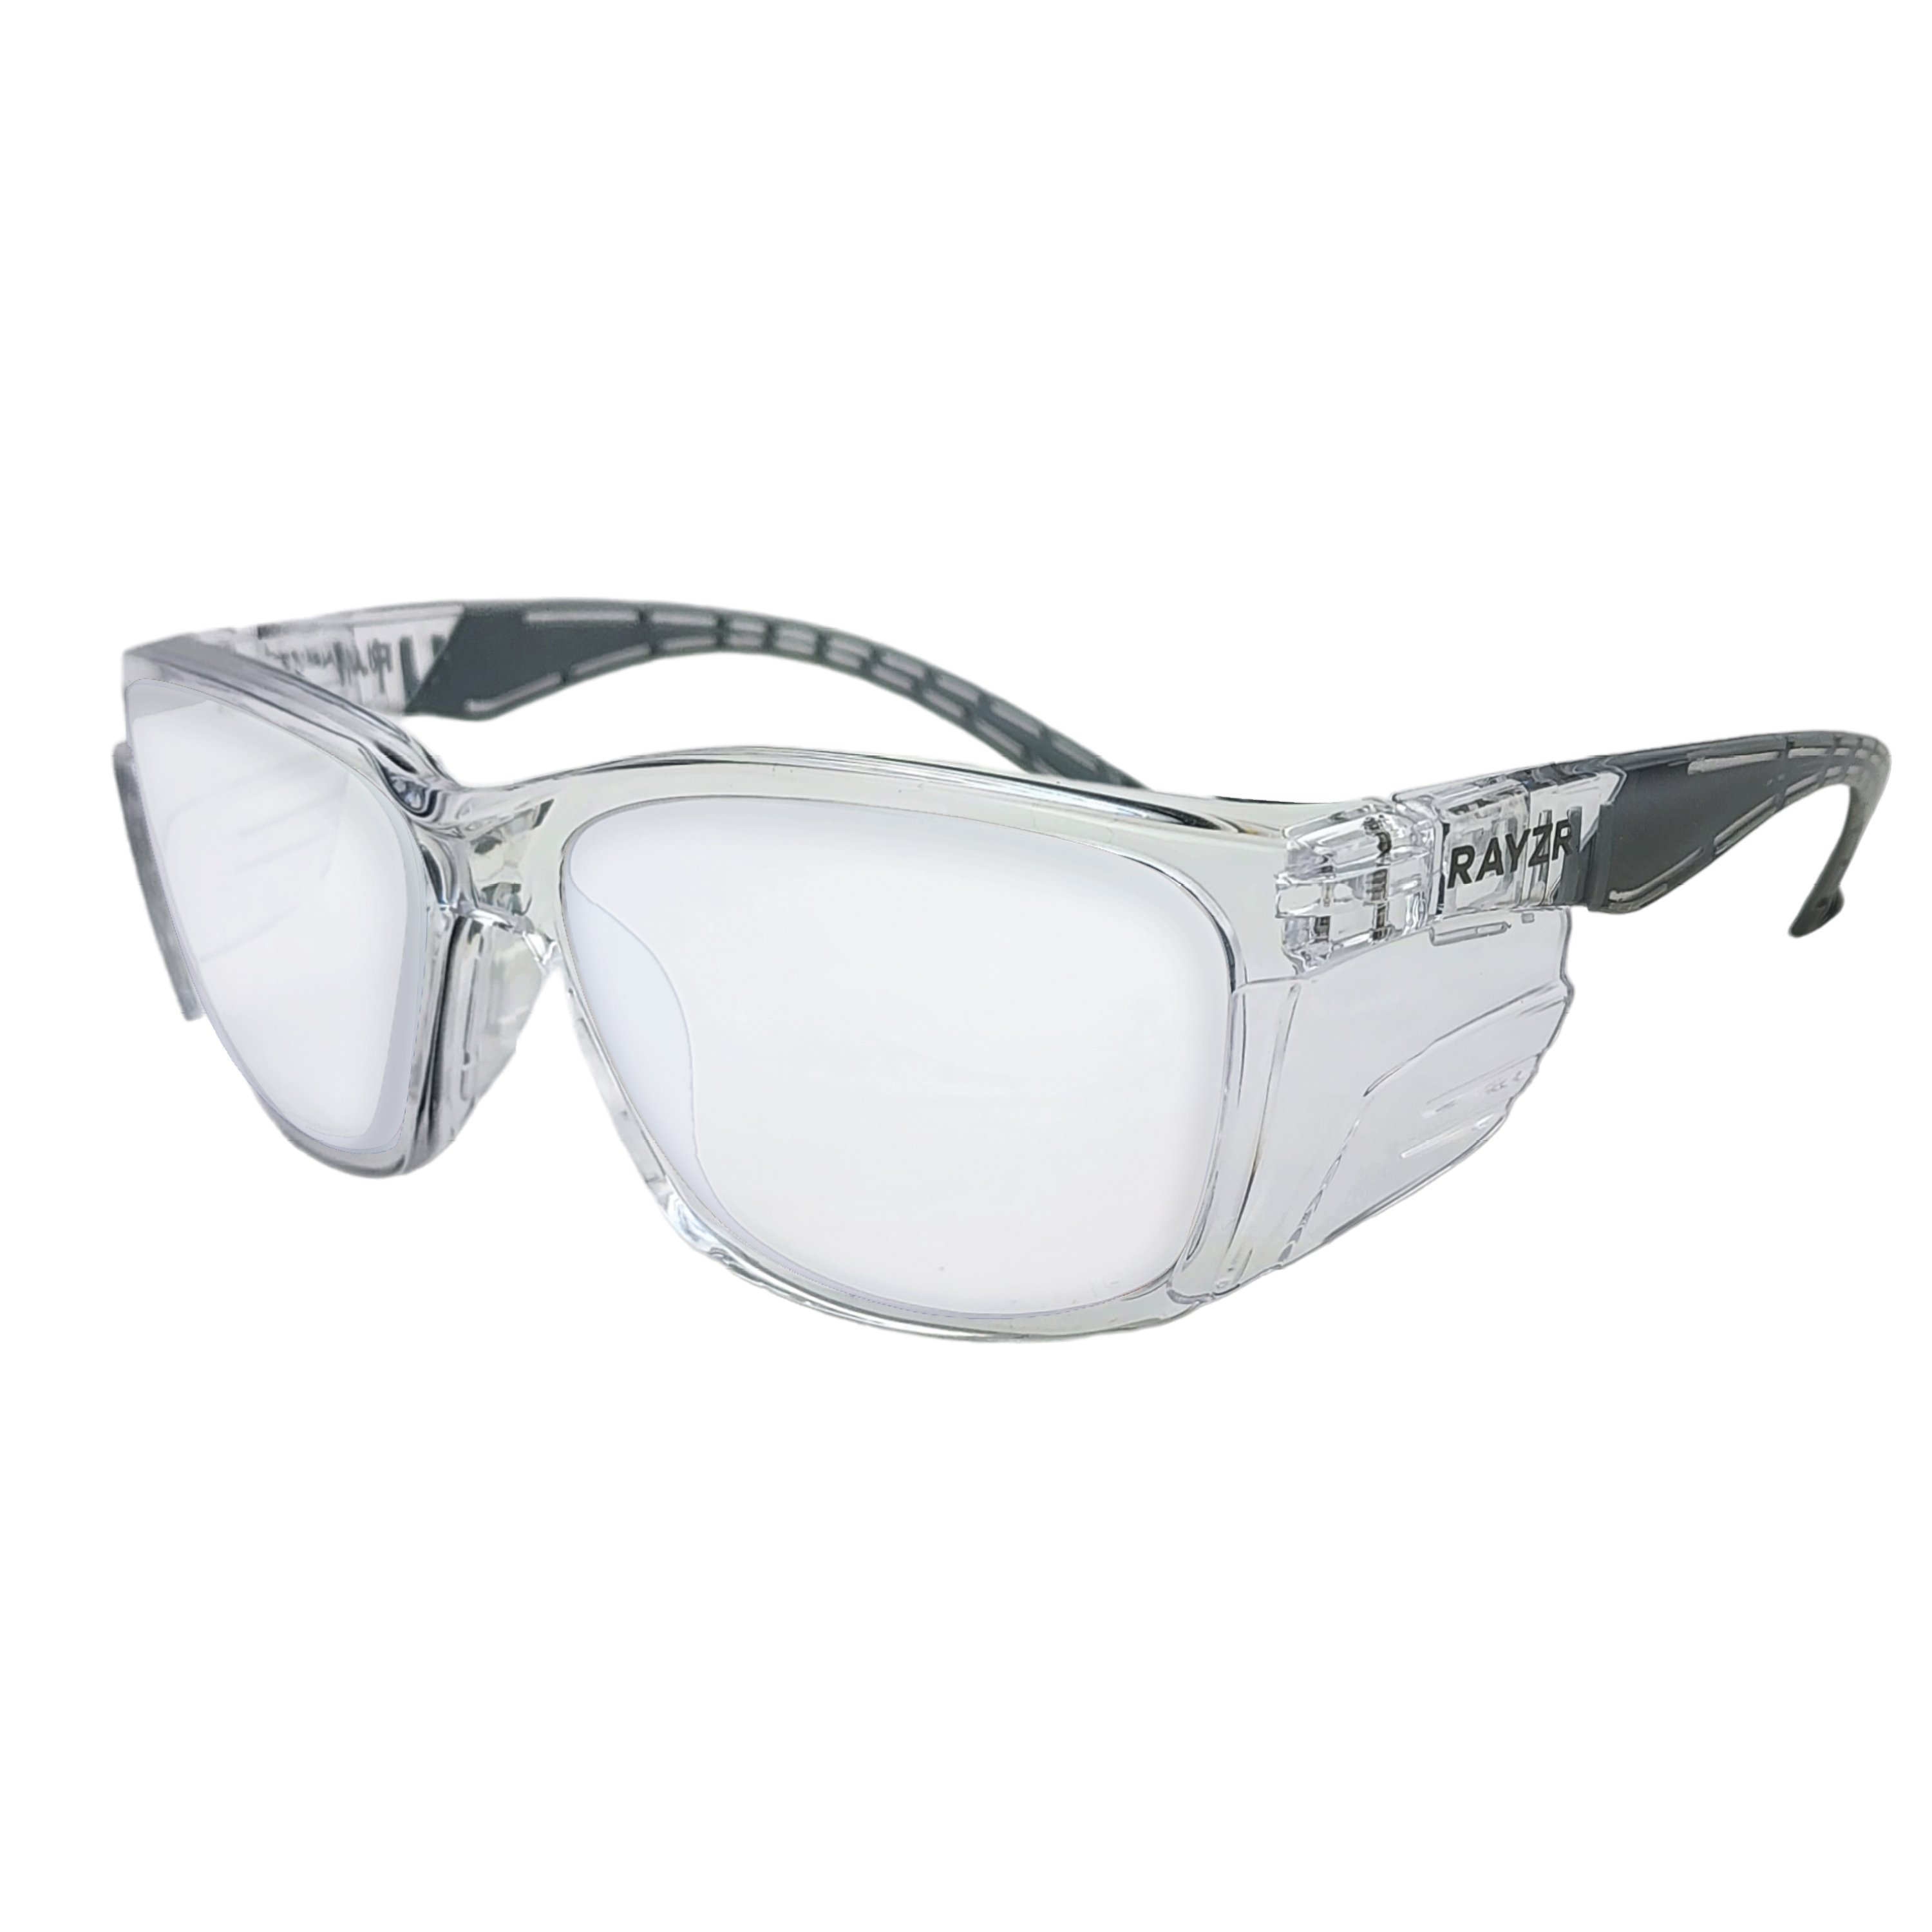 RAYZR SAFETY GLASSES - CLEAR LENS - CLEAR FRAME